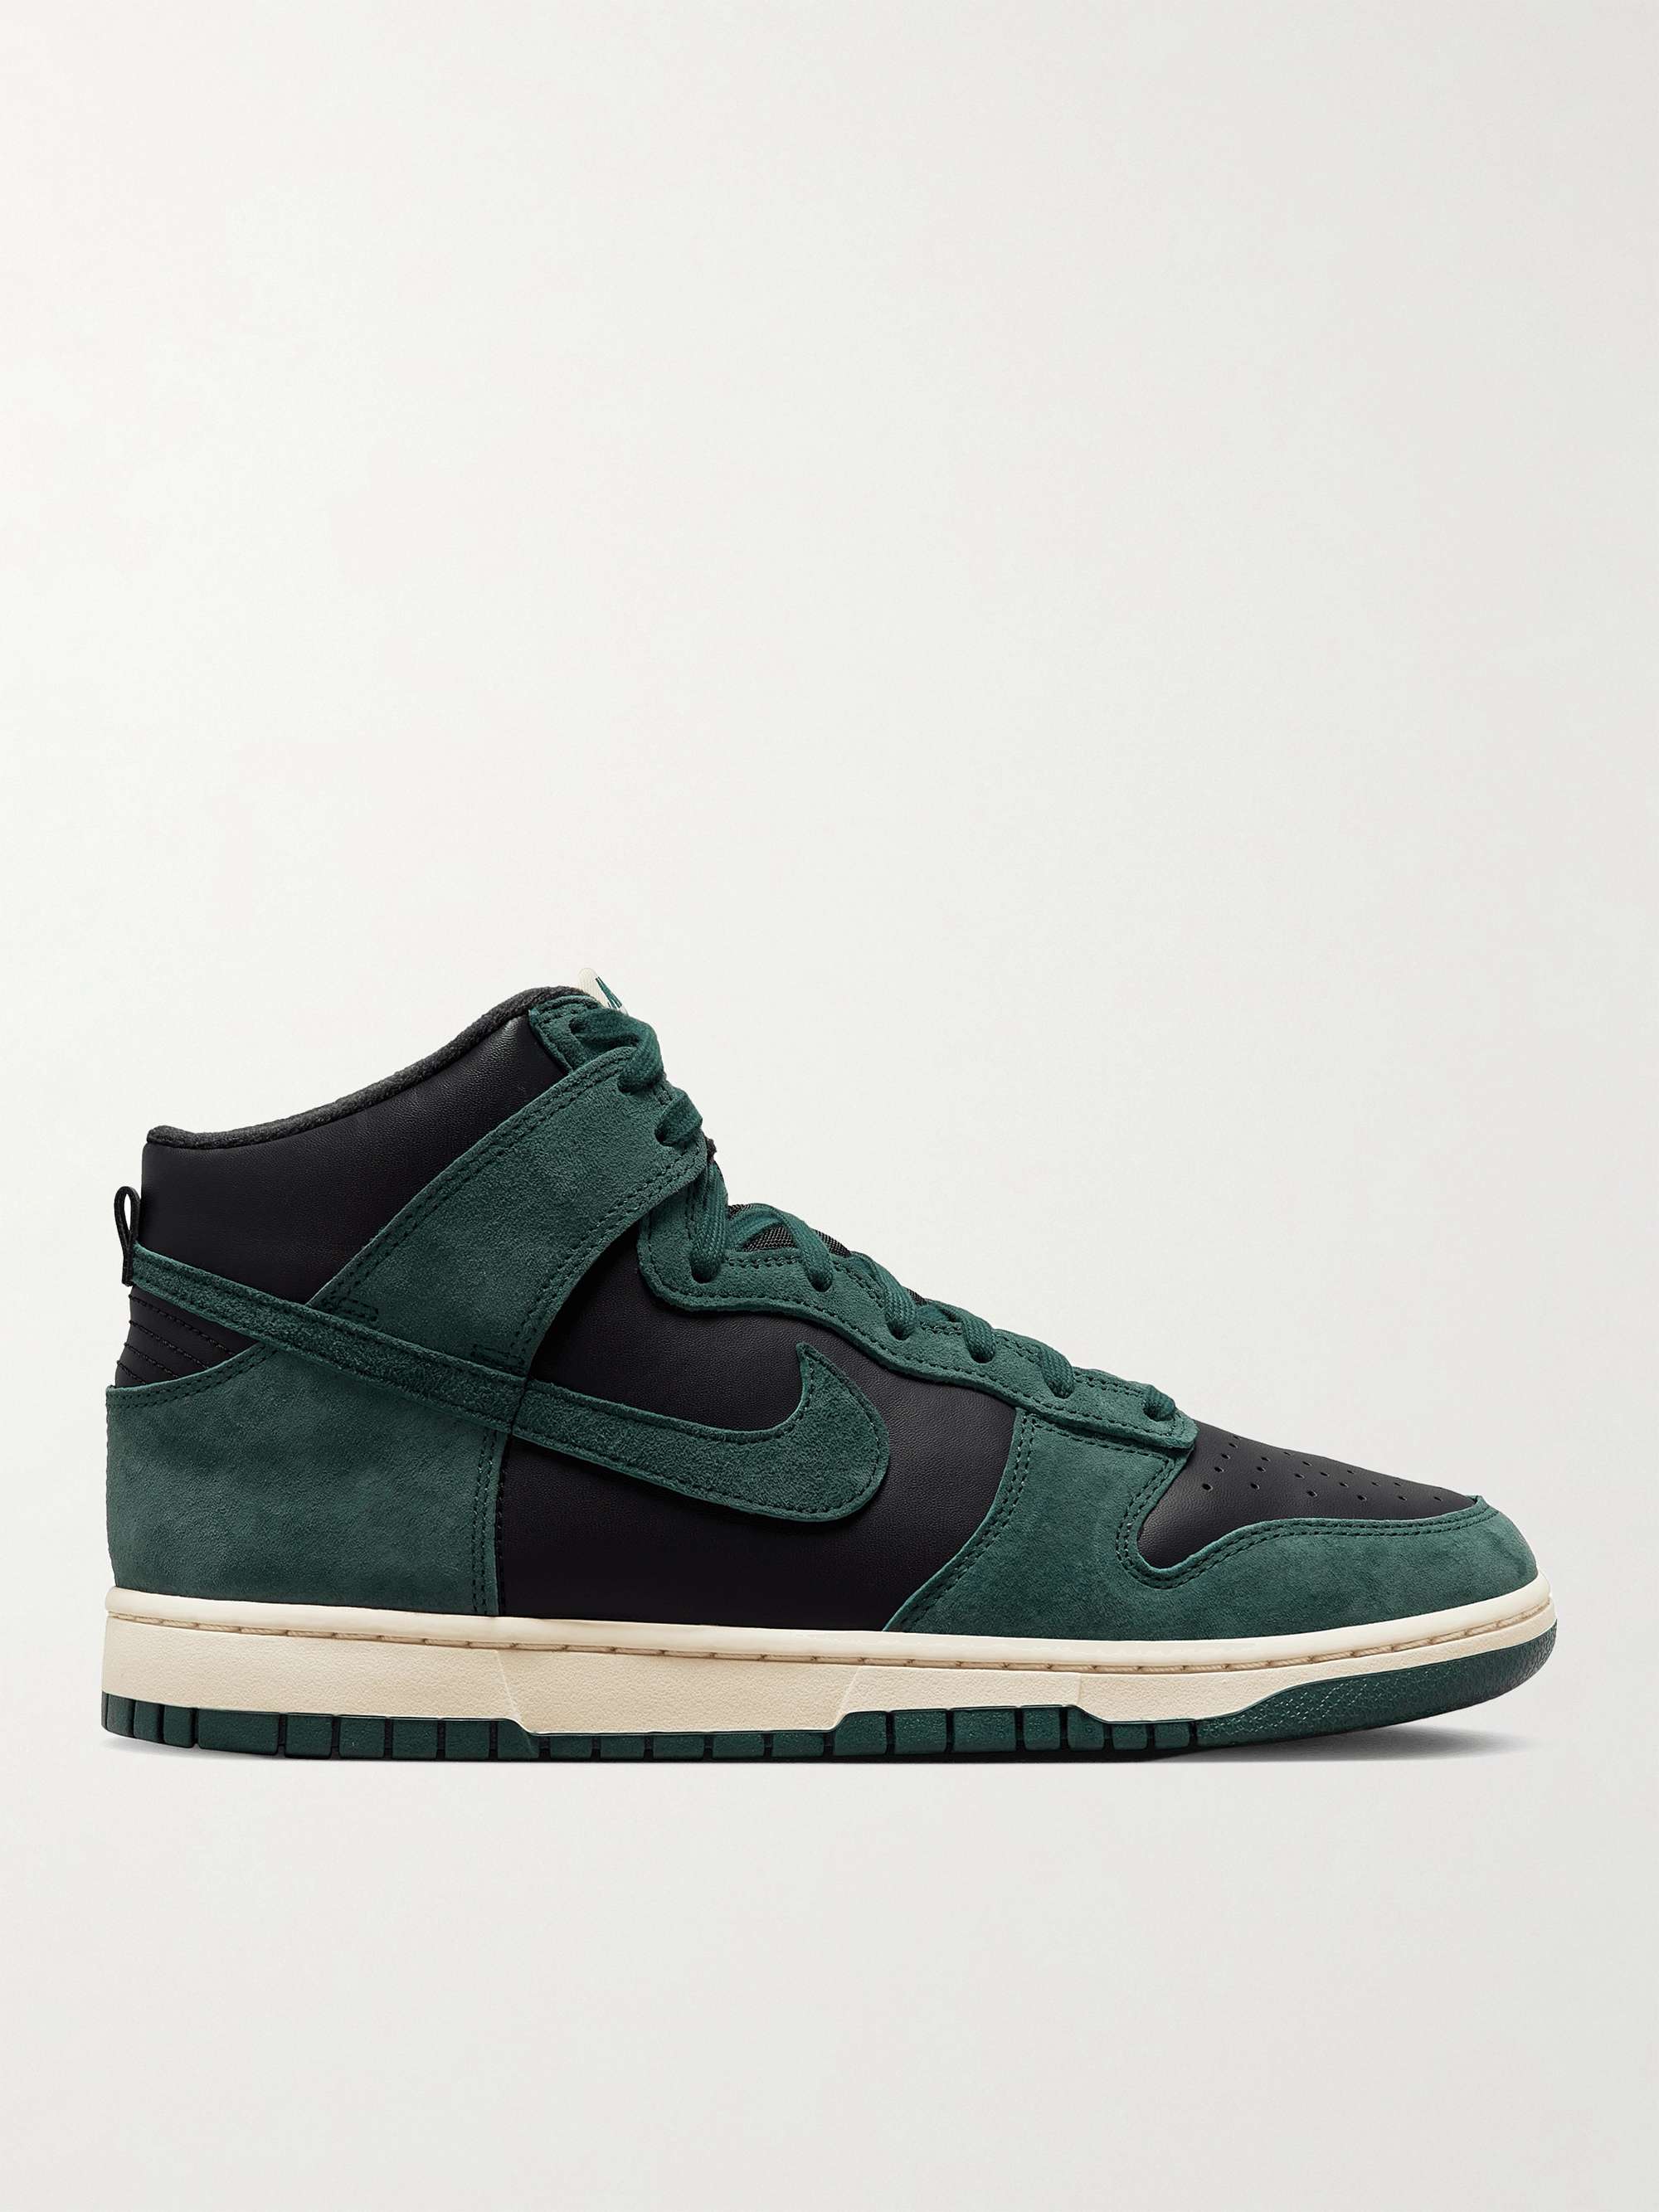 NIKE Dunk High Leather and Nubuck Sneakers | MR PORTER